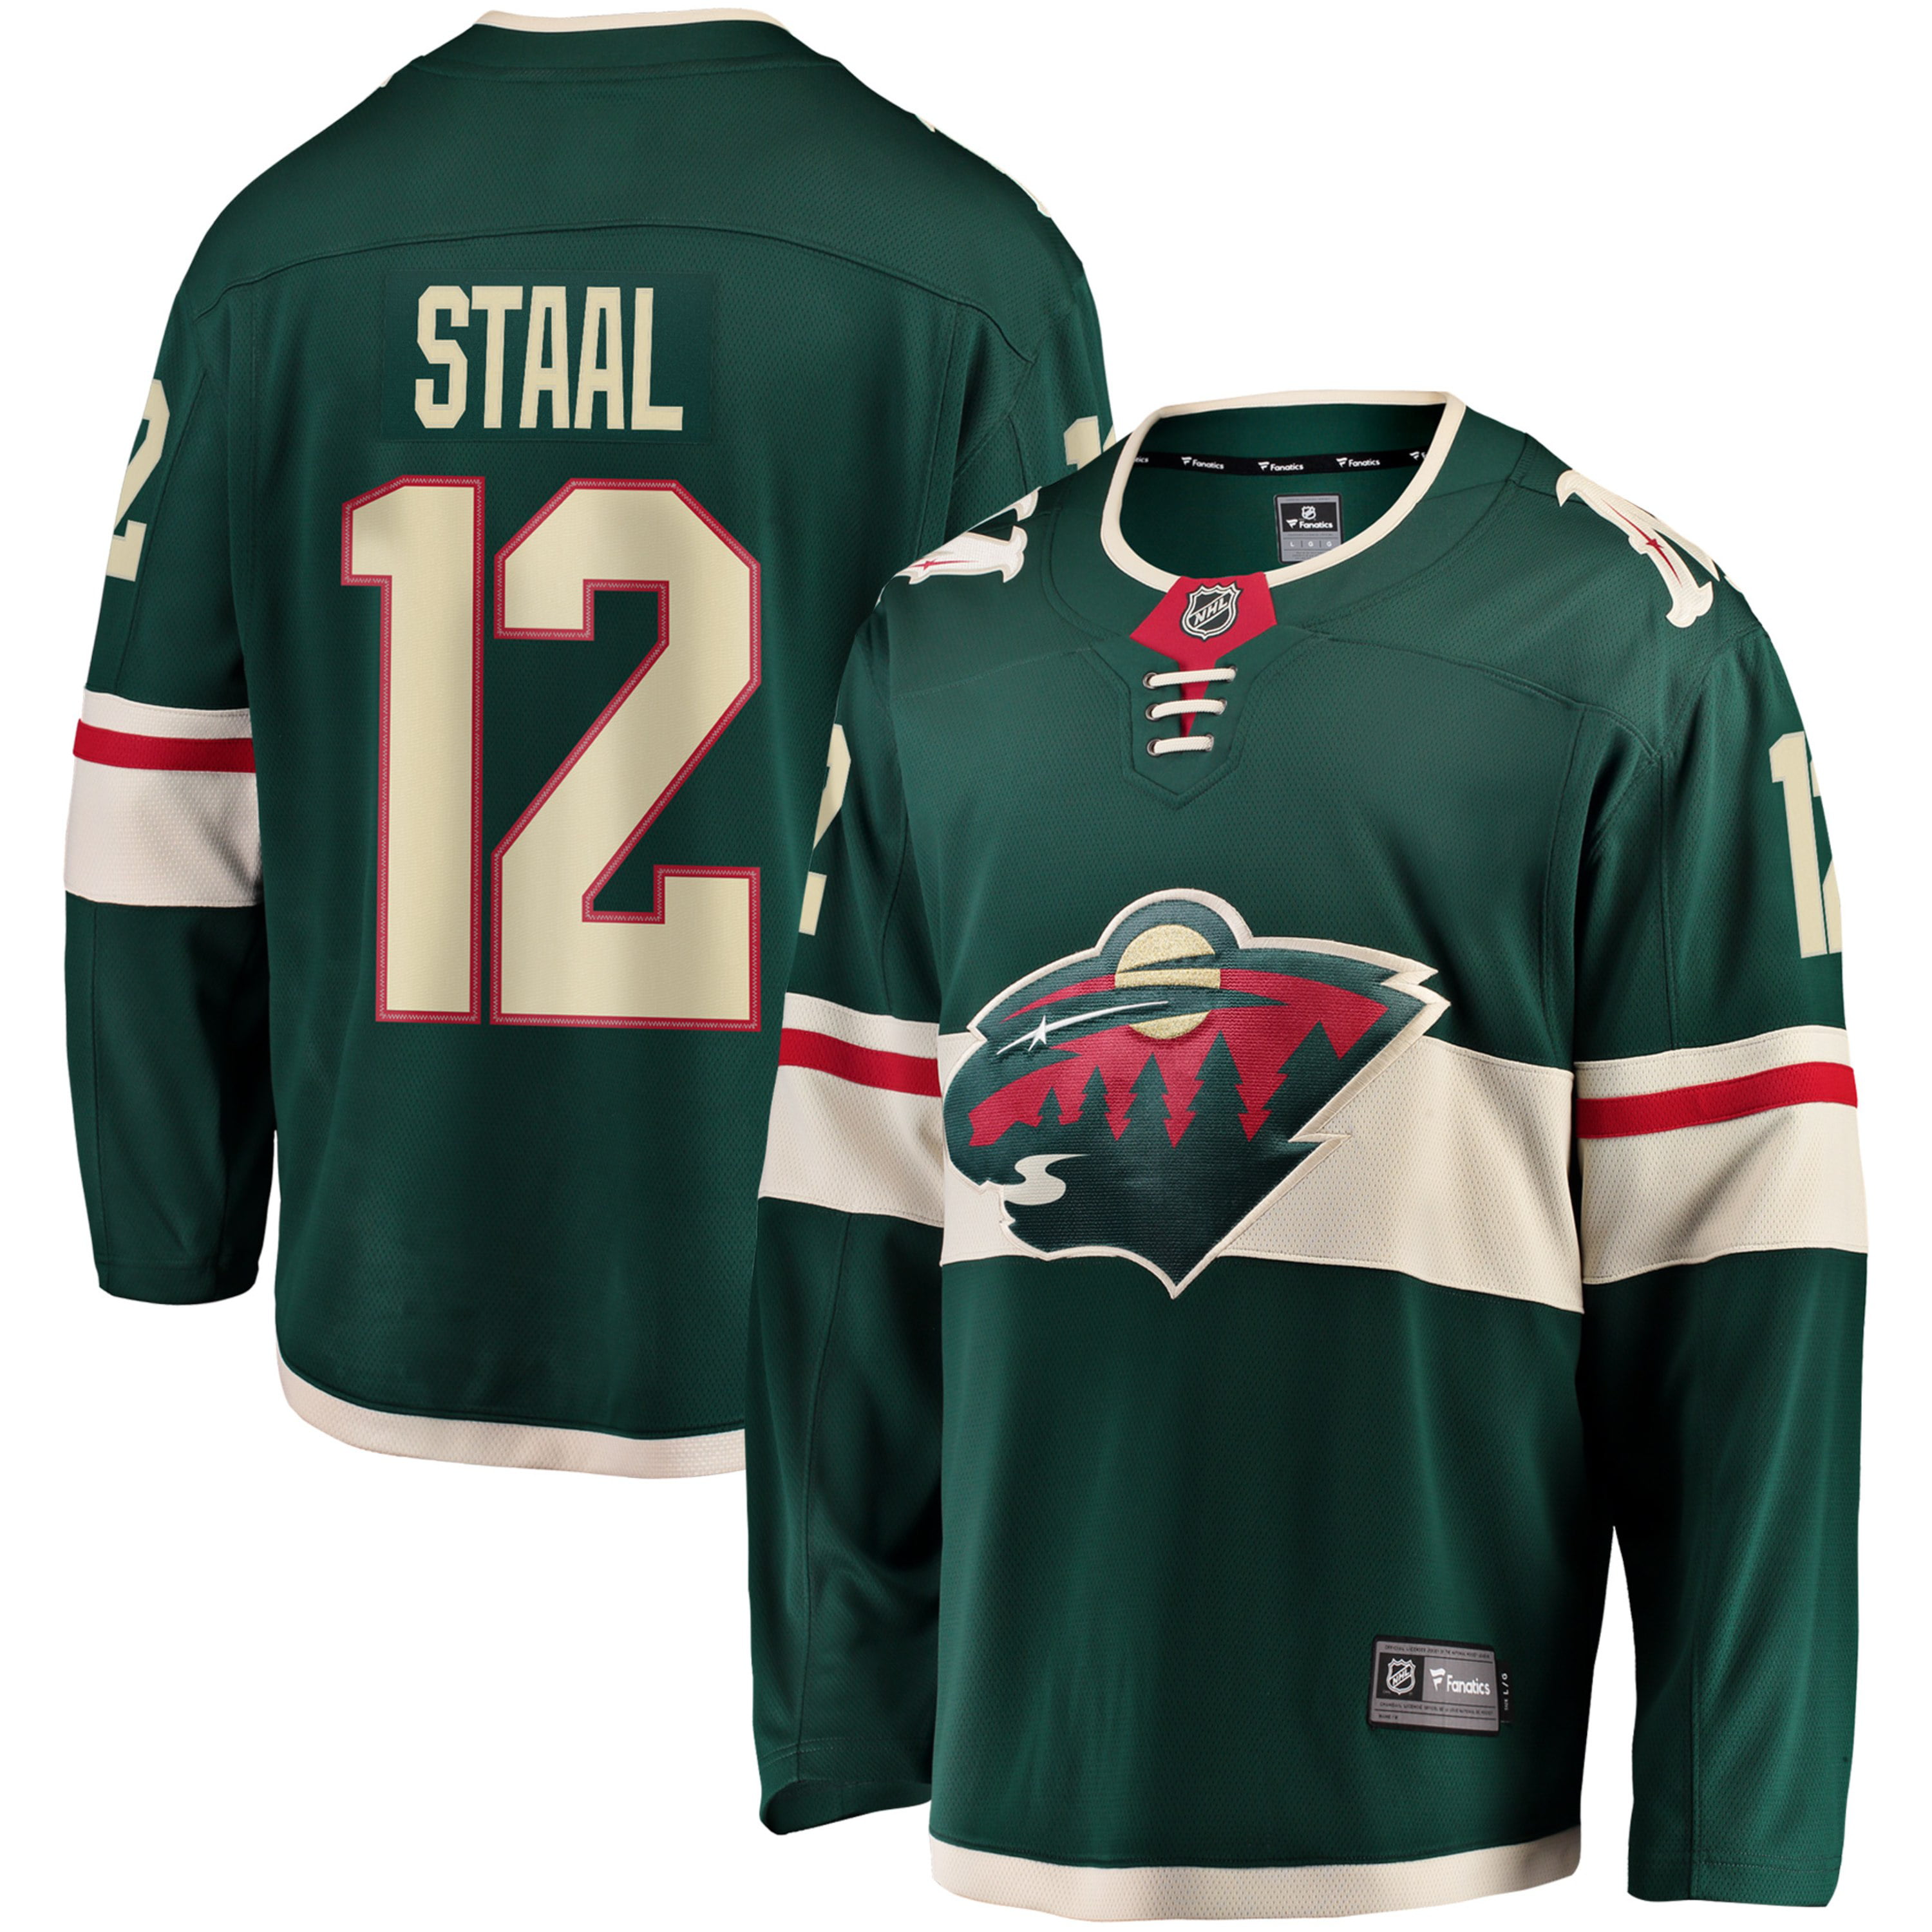 staal jersey